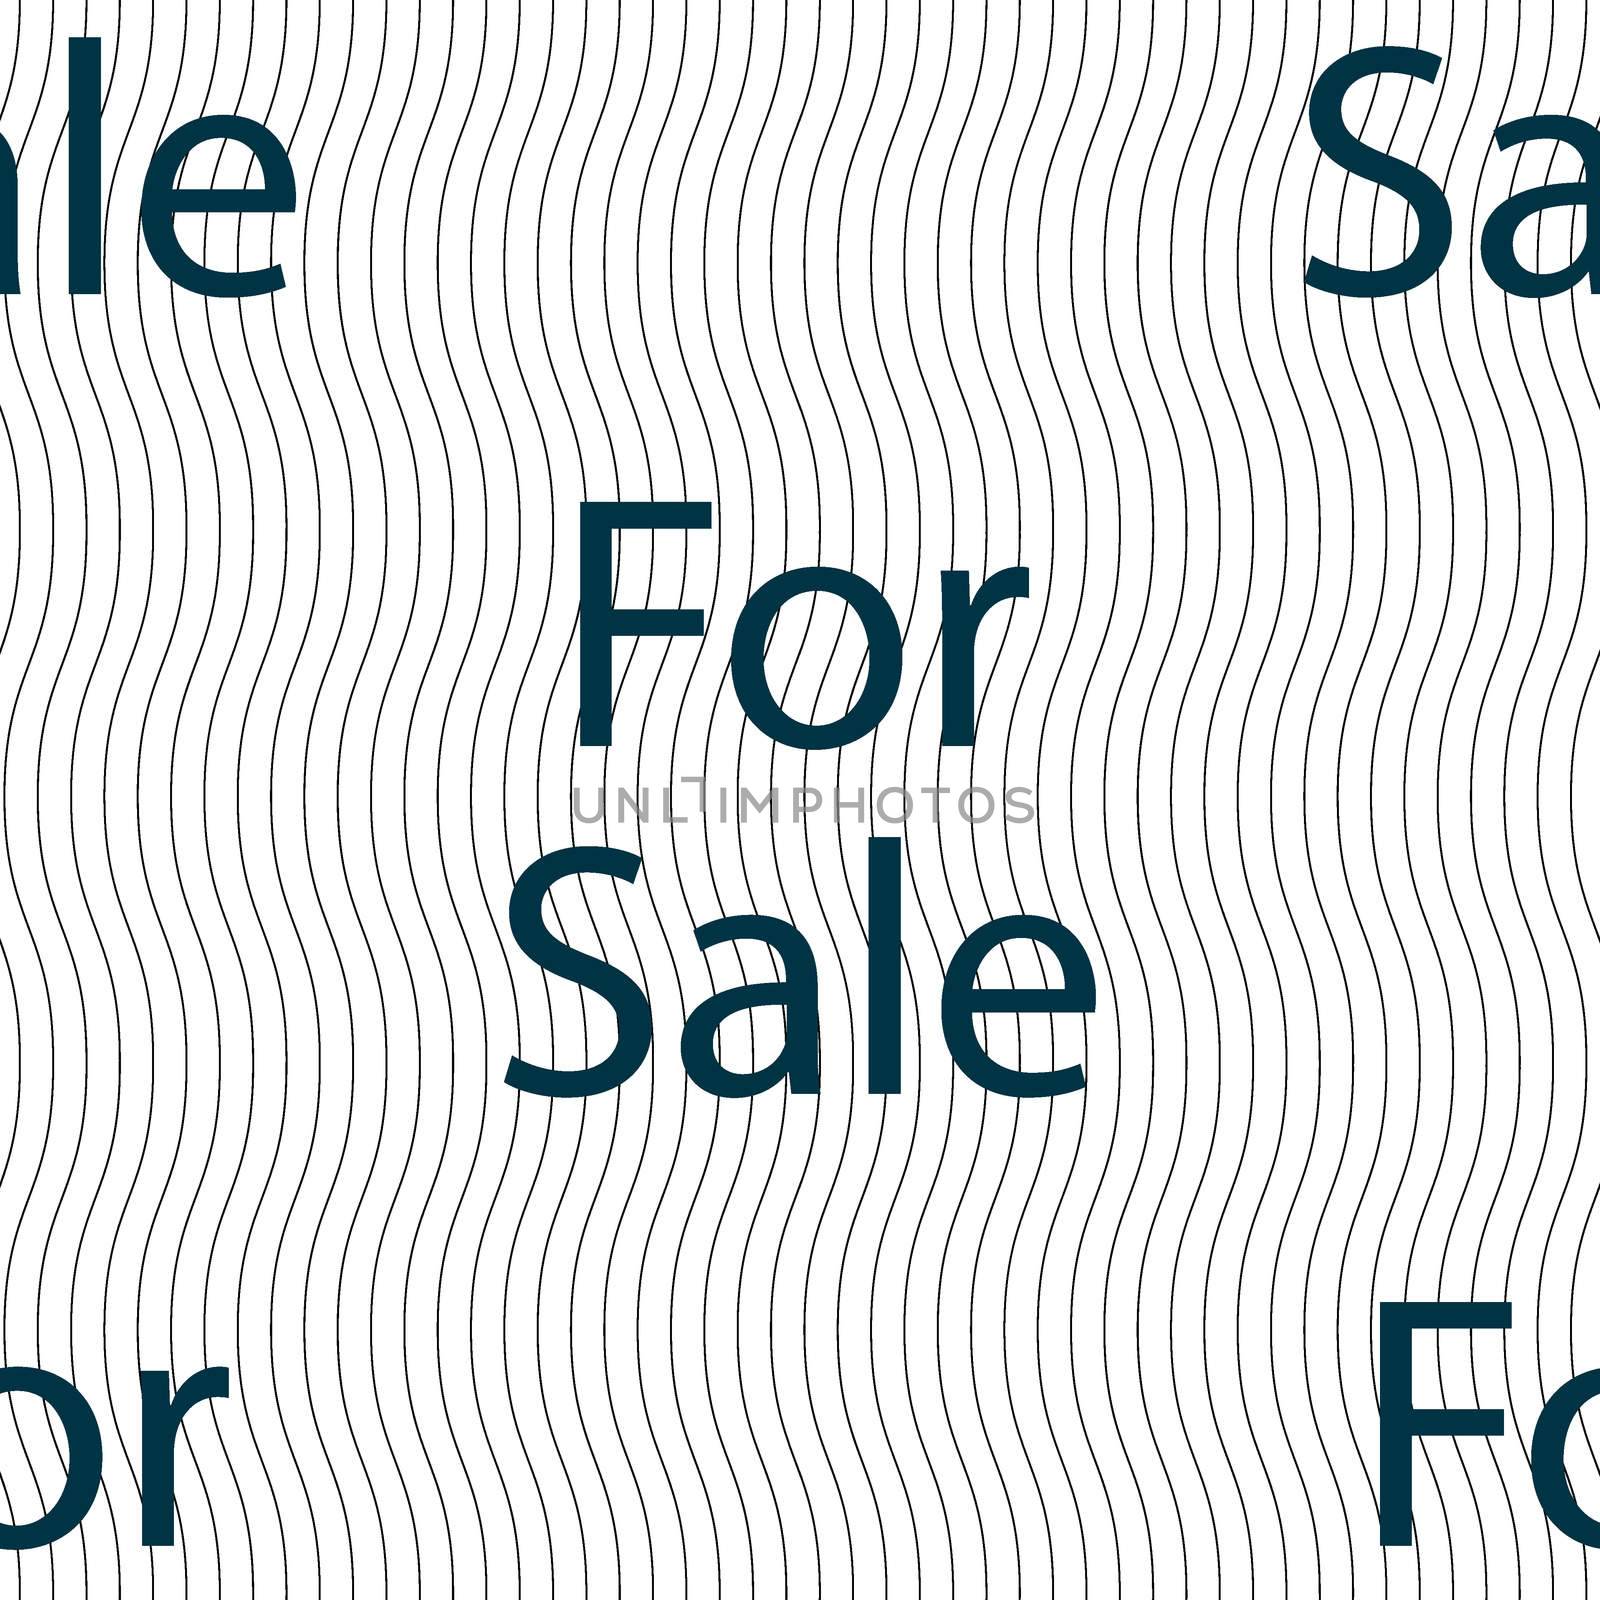 For sale sign icon. Real estate selling. Seamless pattern with geometric texture.  by serhii_lohvyniuk